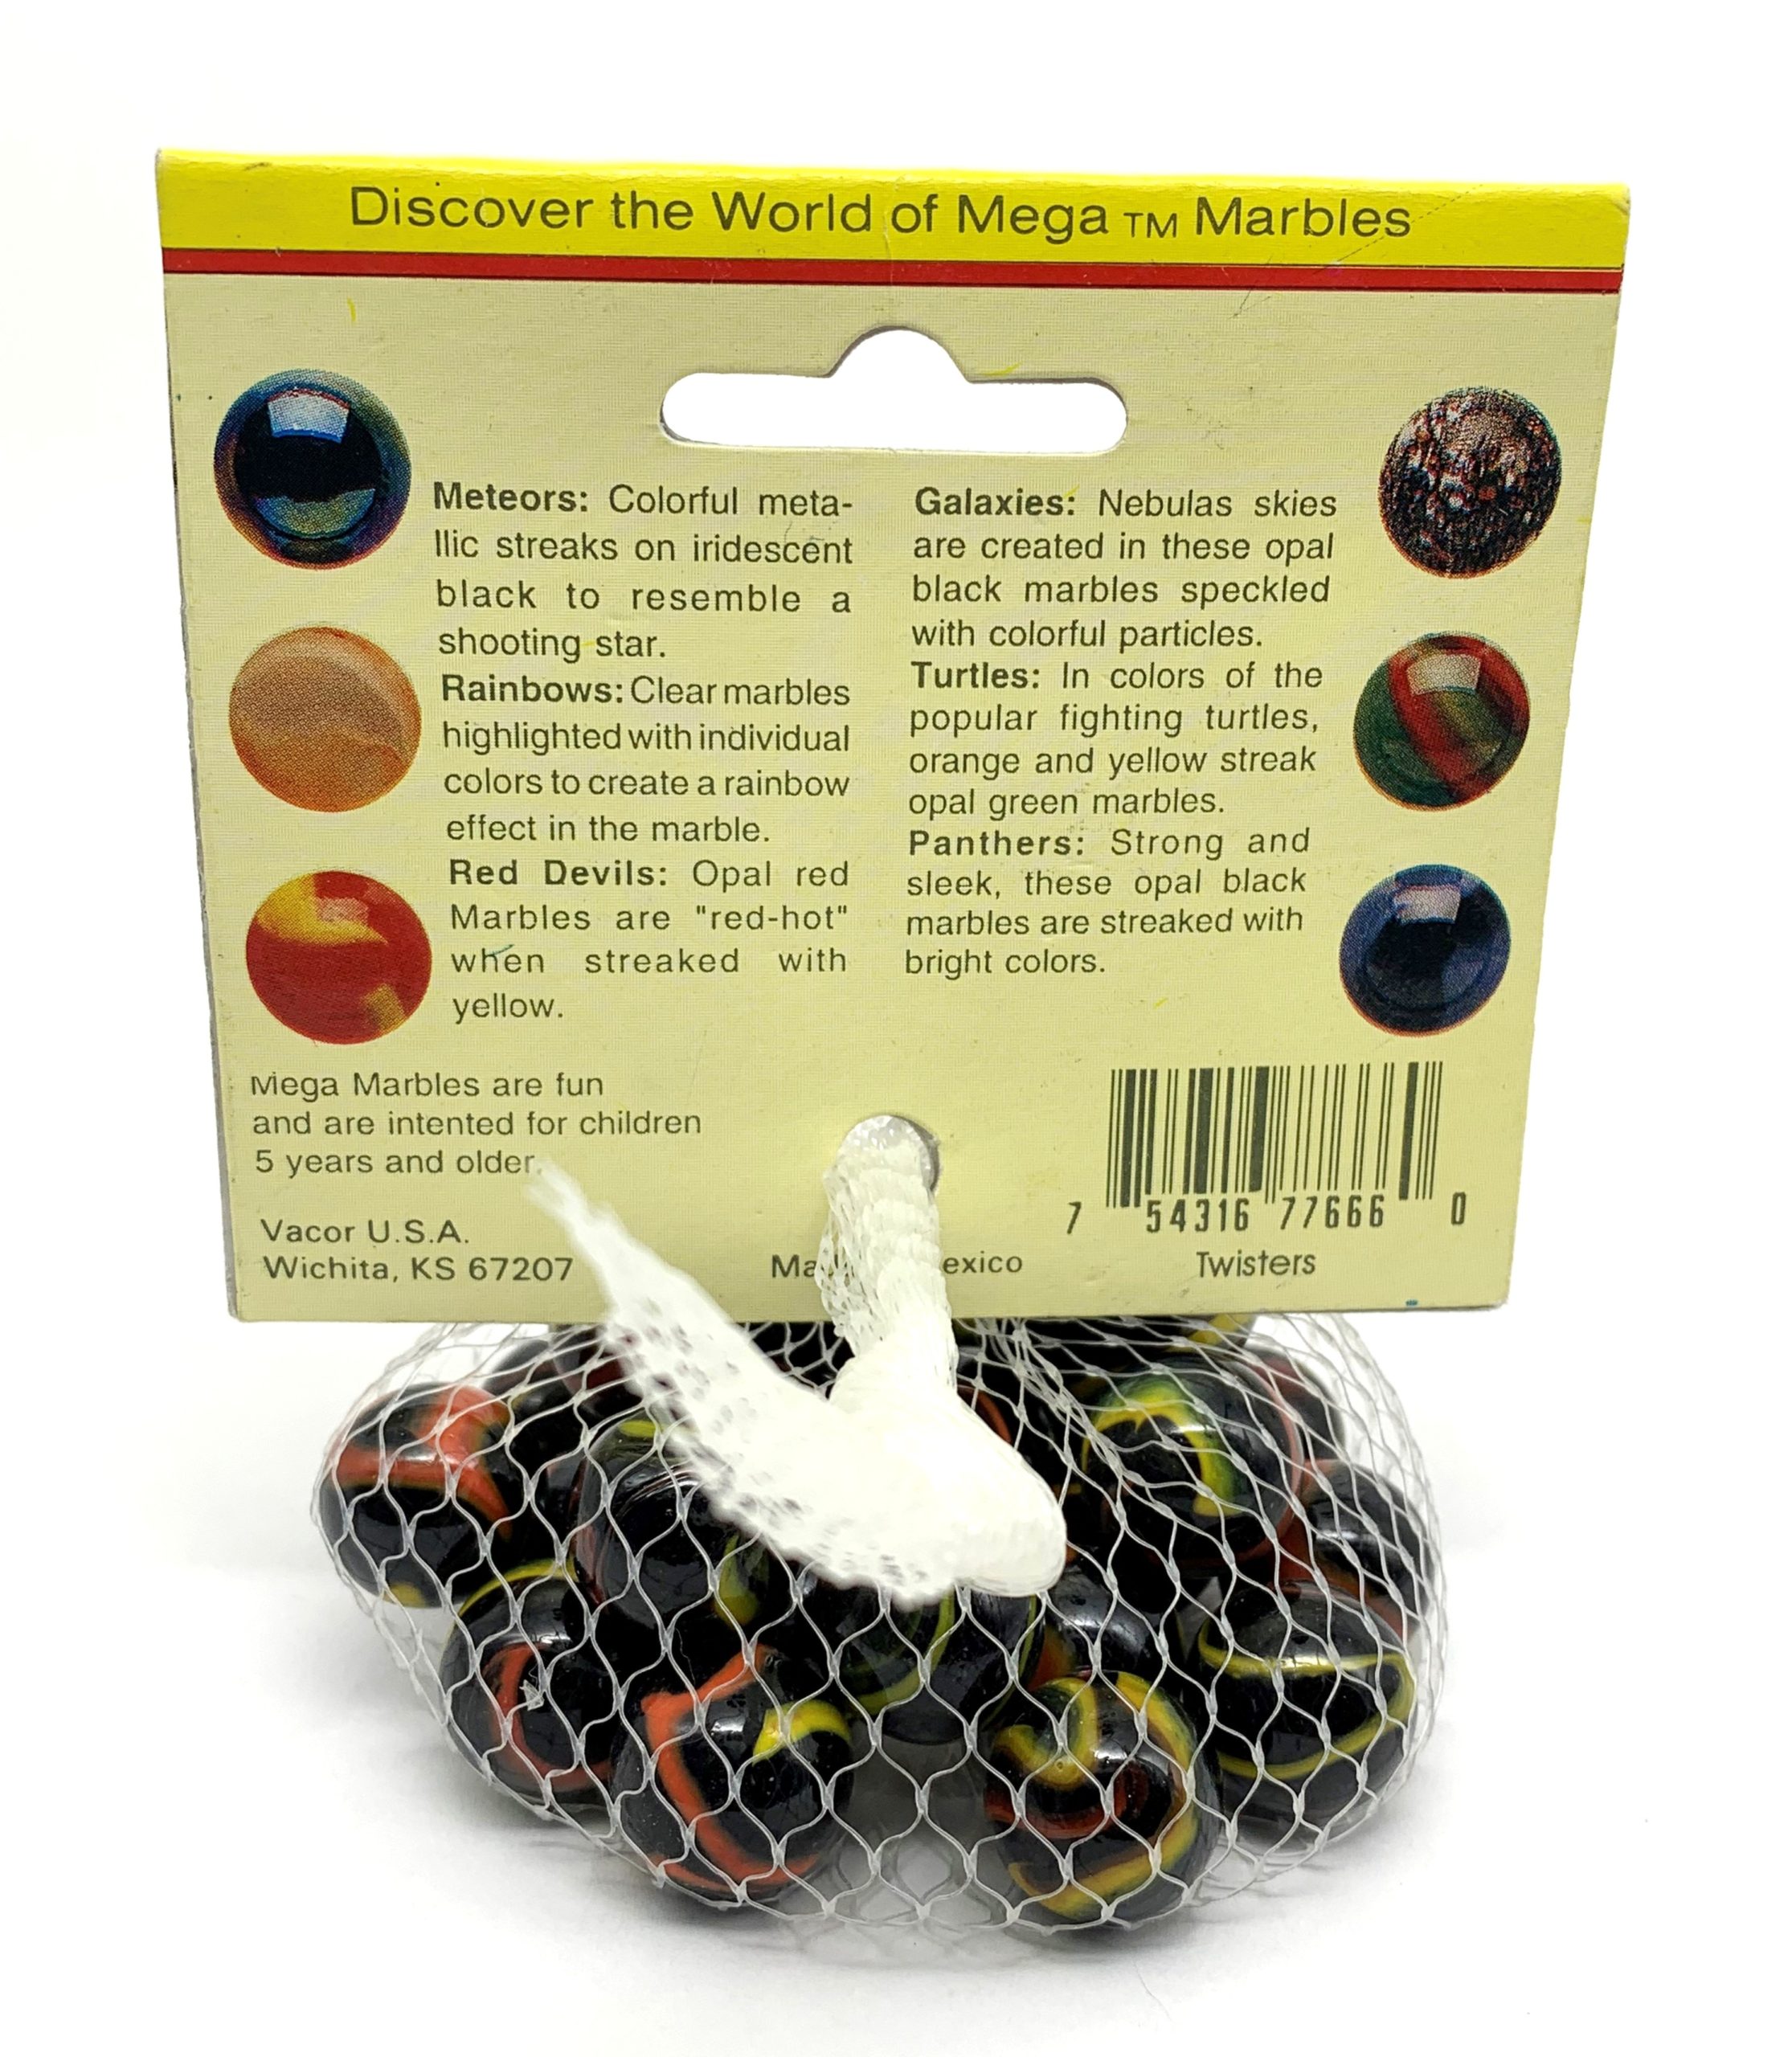 Net Bag of 25 Twisters Collector Series Yellow Label Vintage Glass Mega  Marbles by Vacor Black w Red / Orange and Yellow Ribbon Swirls 1997